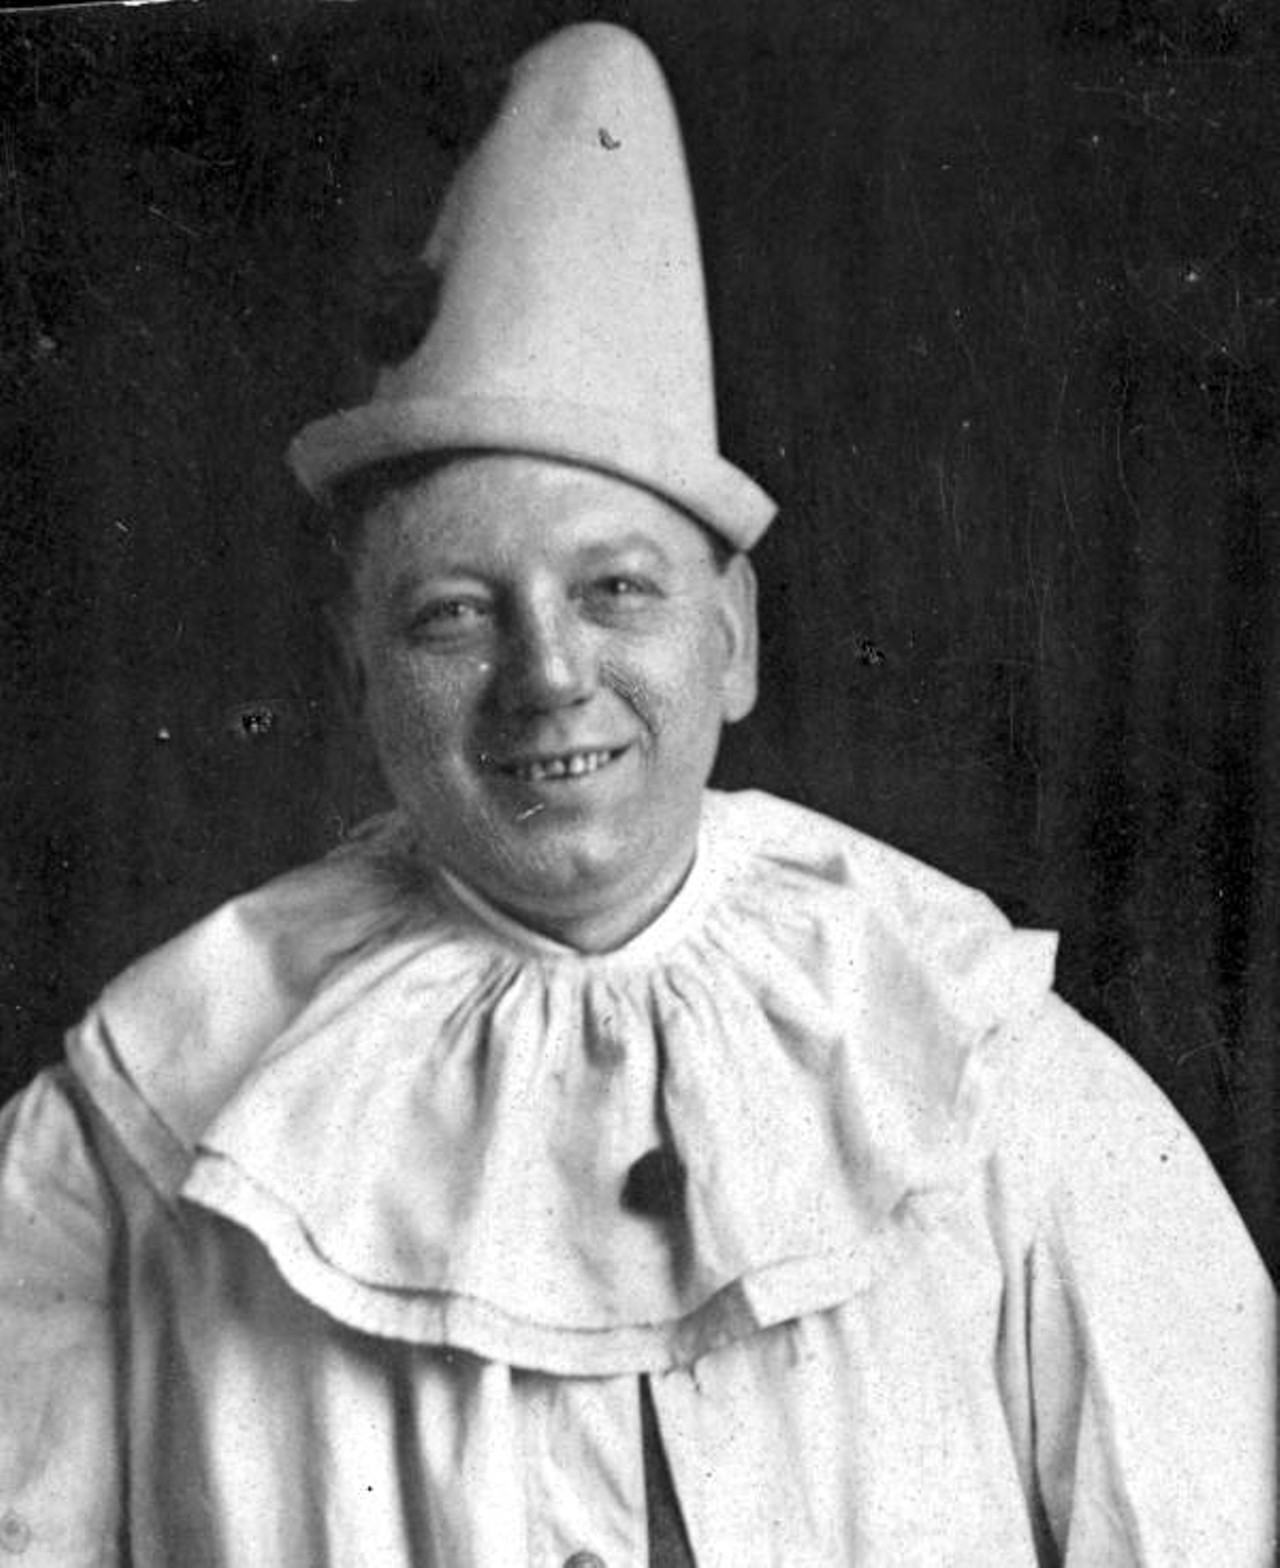 An unidentified smiling man in a clown outfit, circa 1920s (via floridamemory.com)